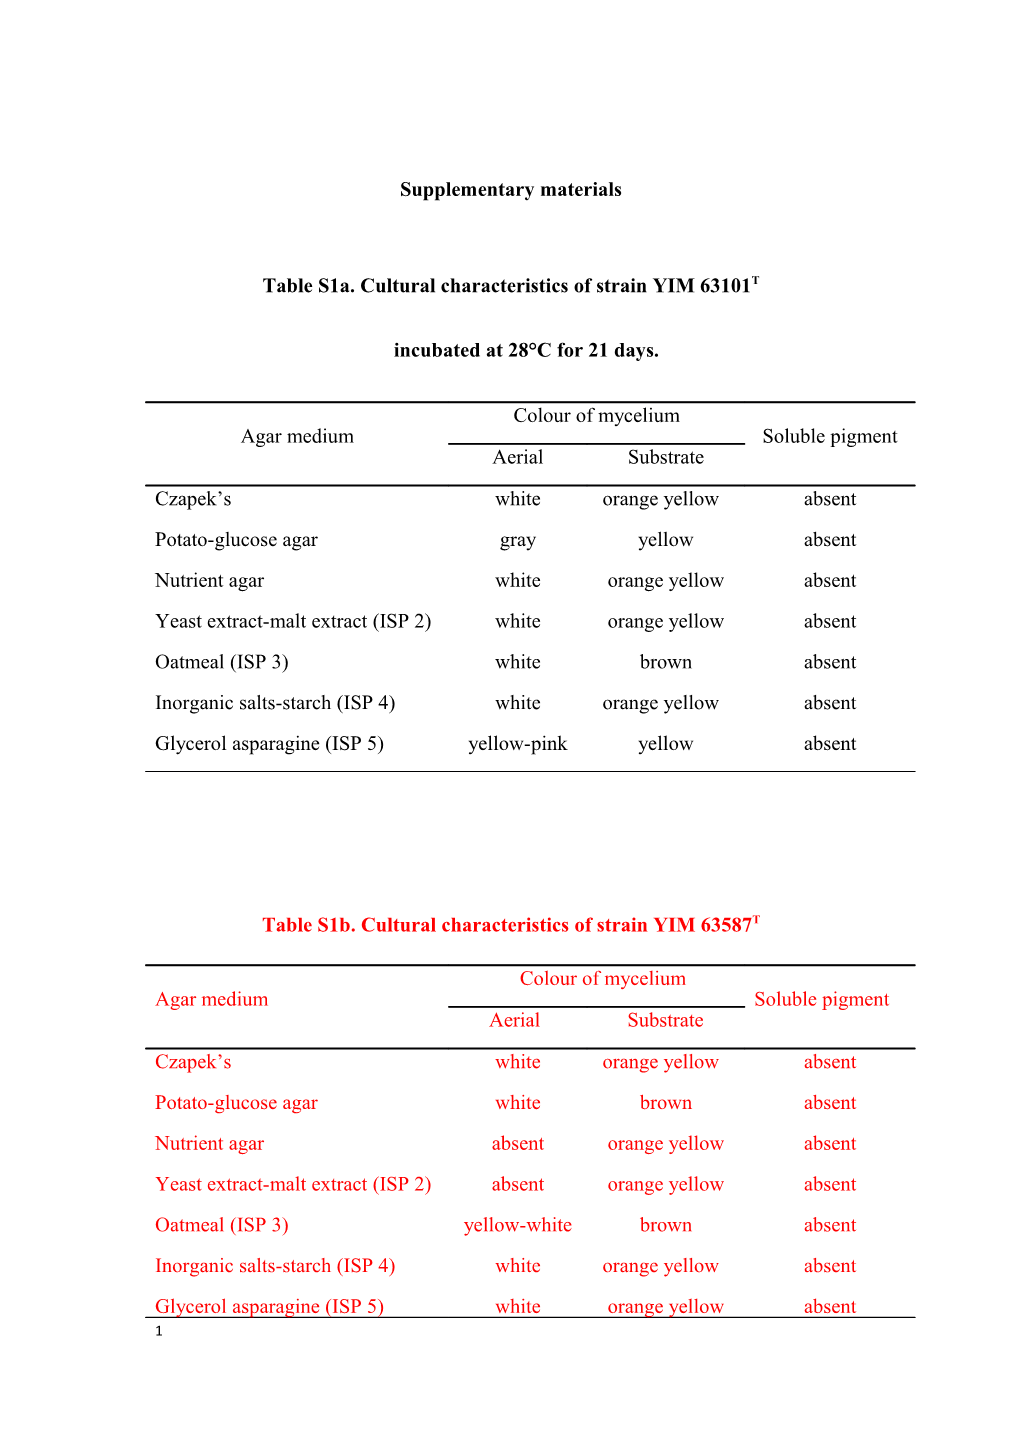 Table S1a. Cultural Characteristics of Strain YIM63101T